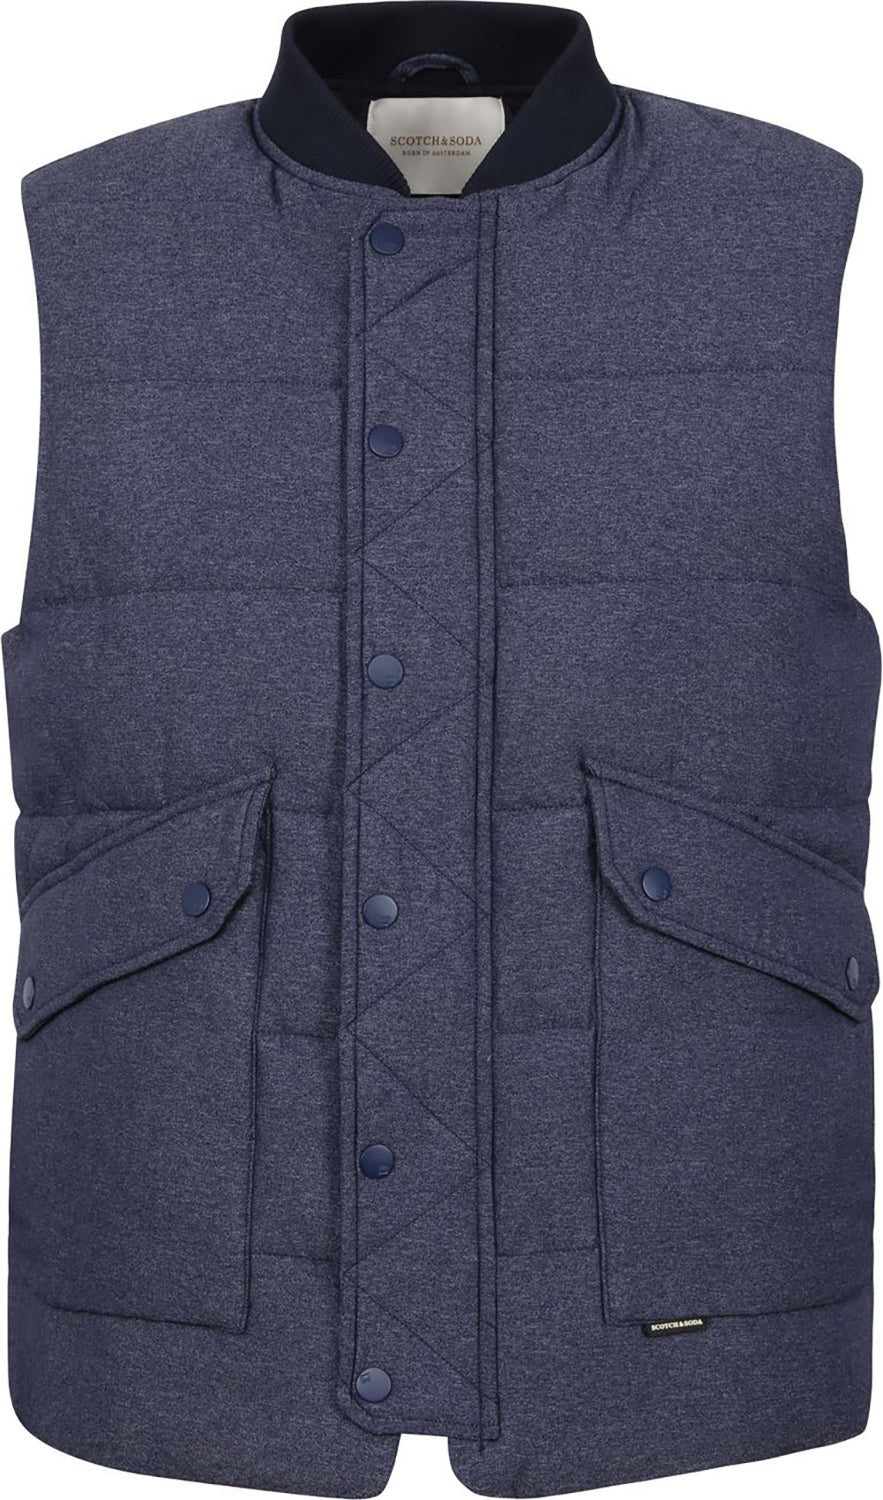 SAS QUILTED BODYWARMER